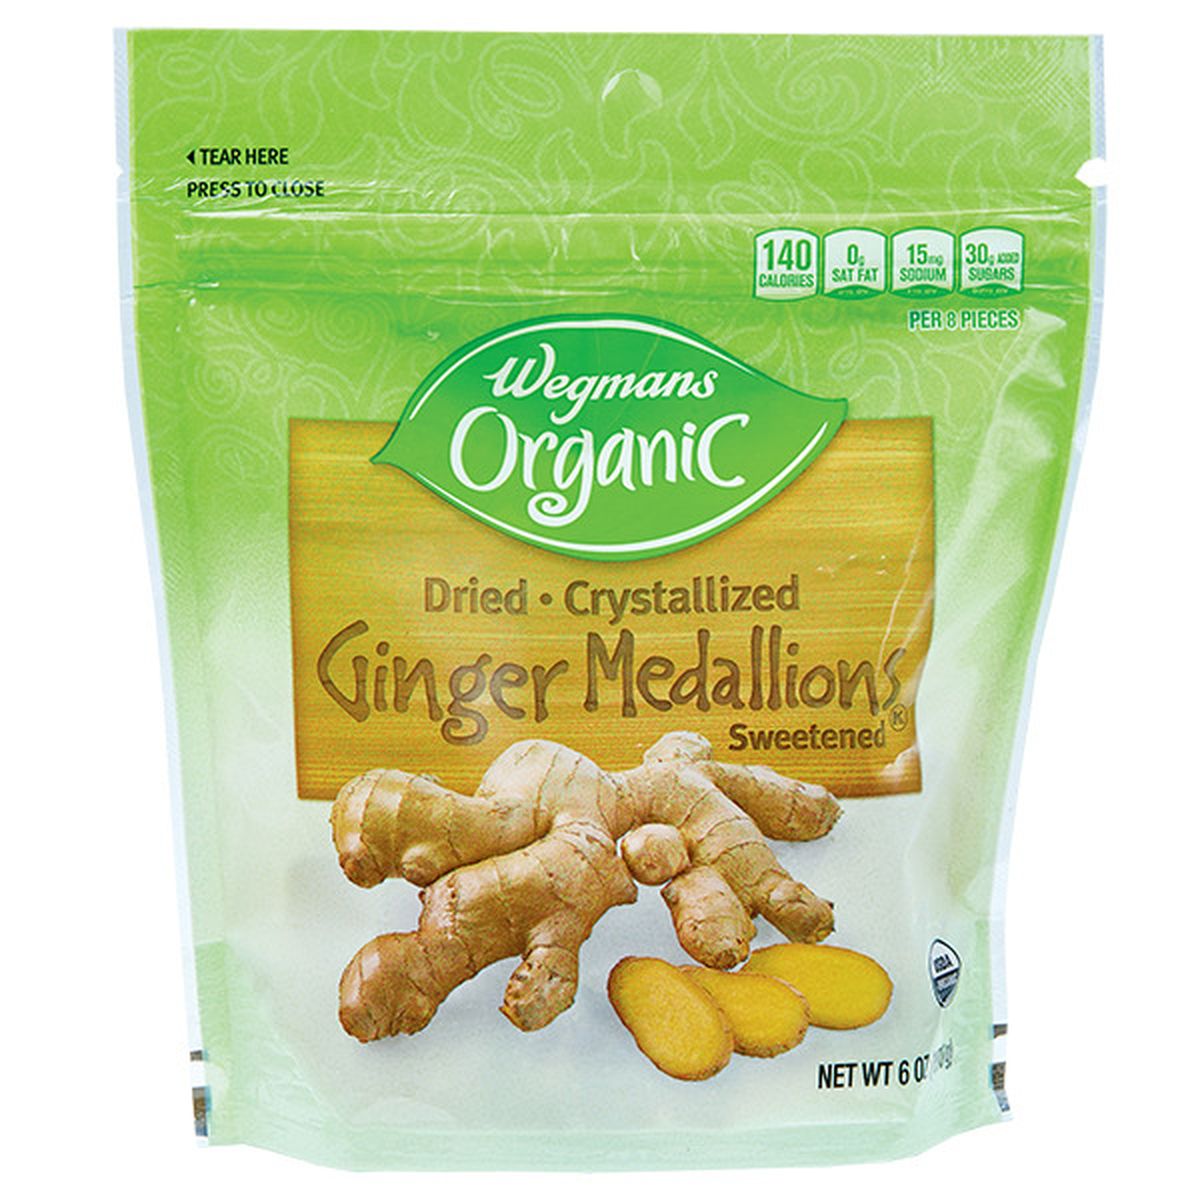 Calories in Wegmans Organic Dried Crystallized Ginger Medallions